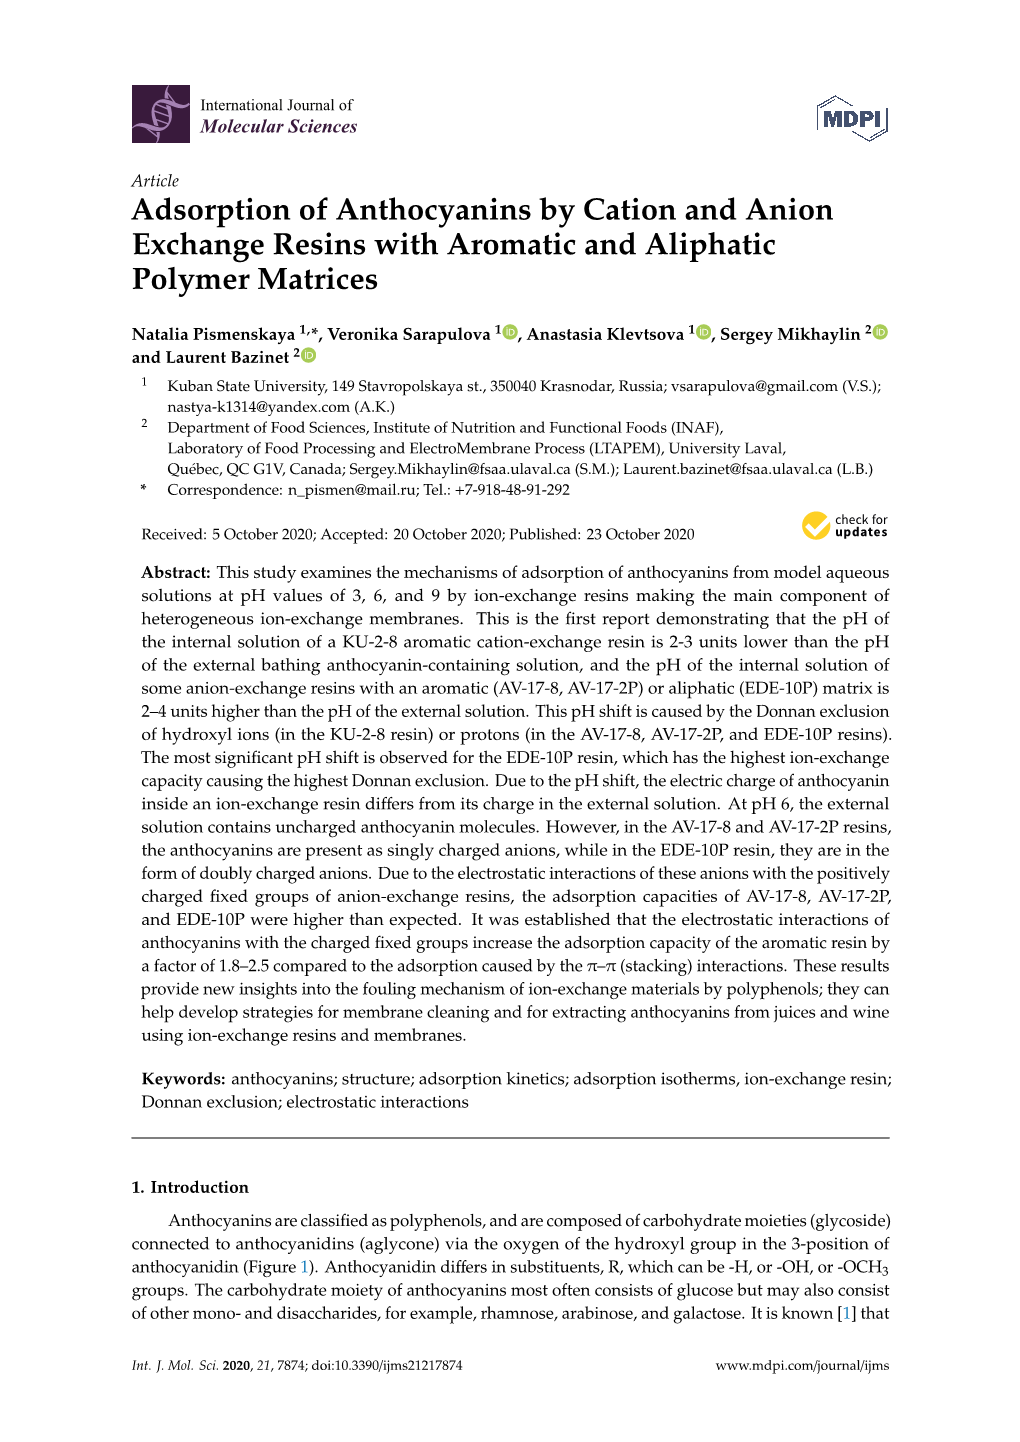 Adsorption of Anthocyanins by Cation and Anion Exchange Resins with Aromatic and Aliphatic Polymer Matrices